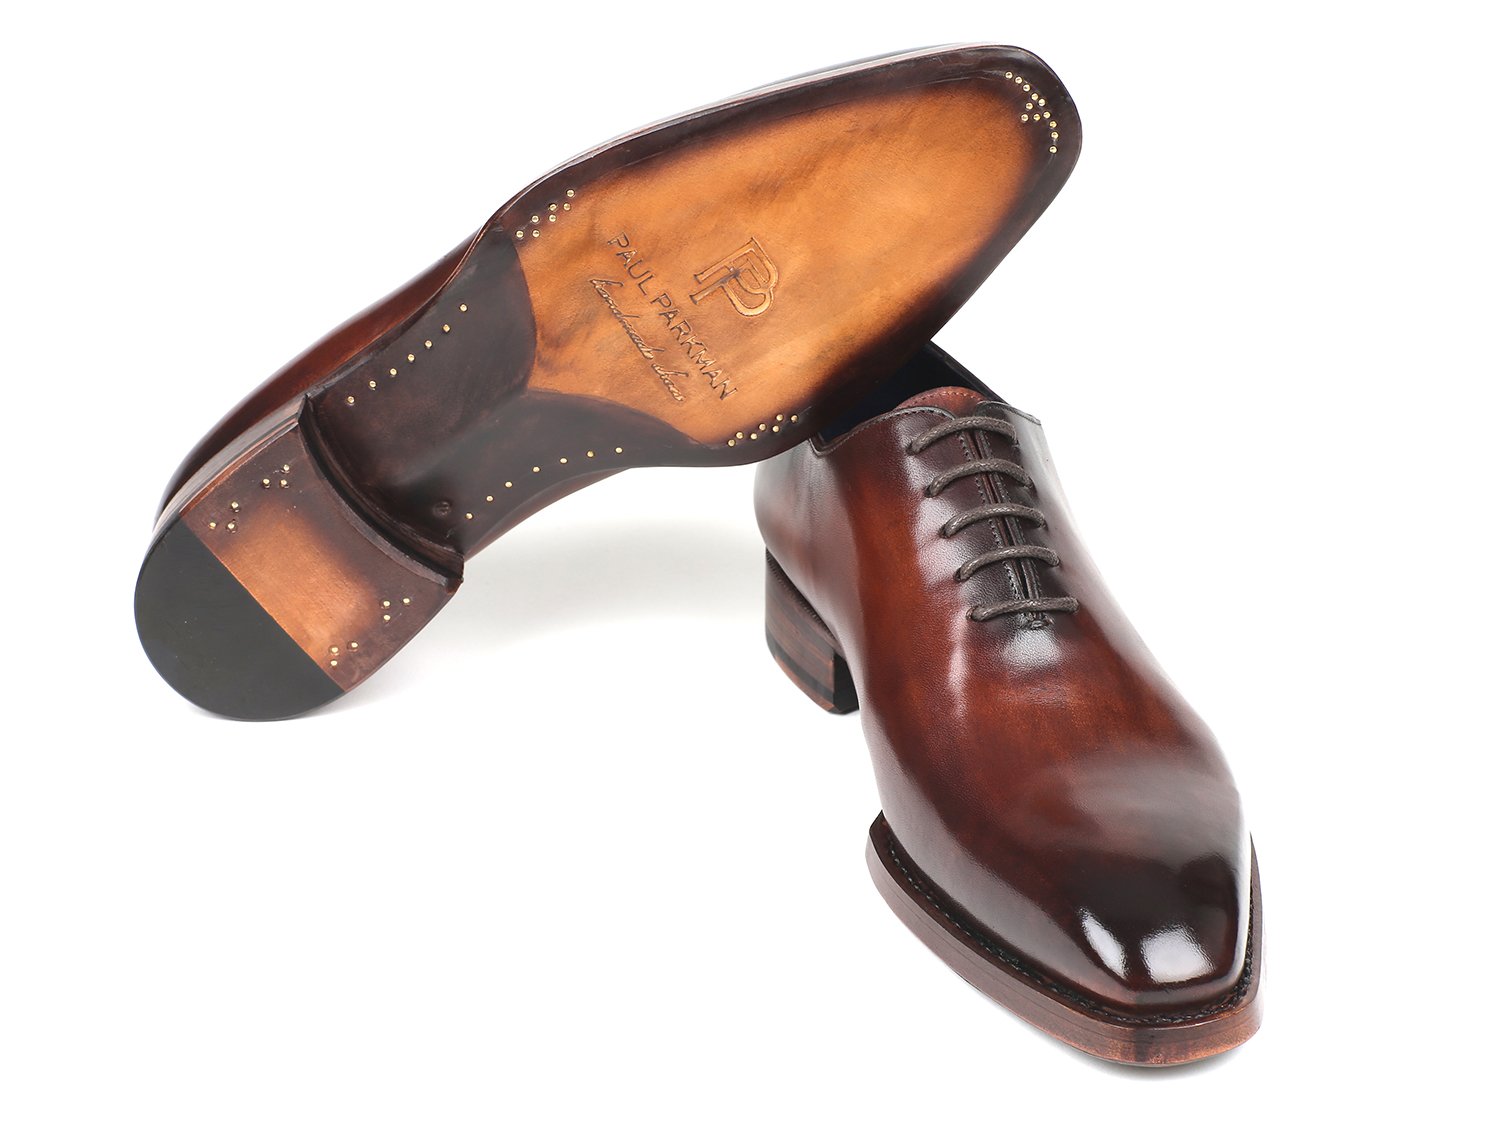 Paul Parkman Goodyear Welted Wholecut Oxfords Brown Hand-Painted - 044BRW